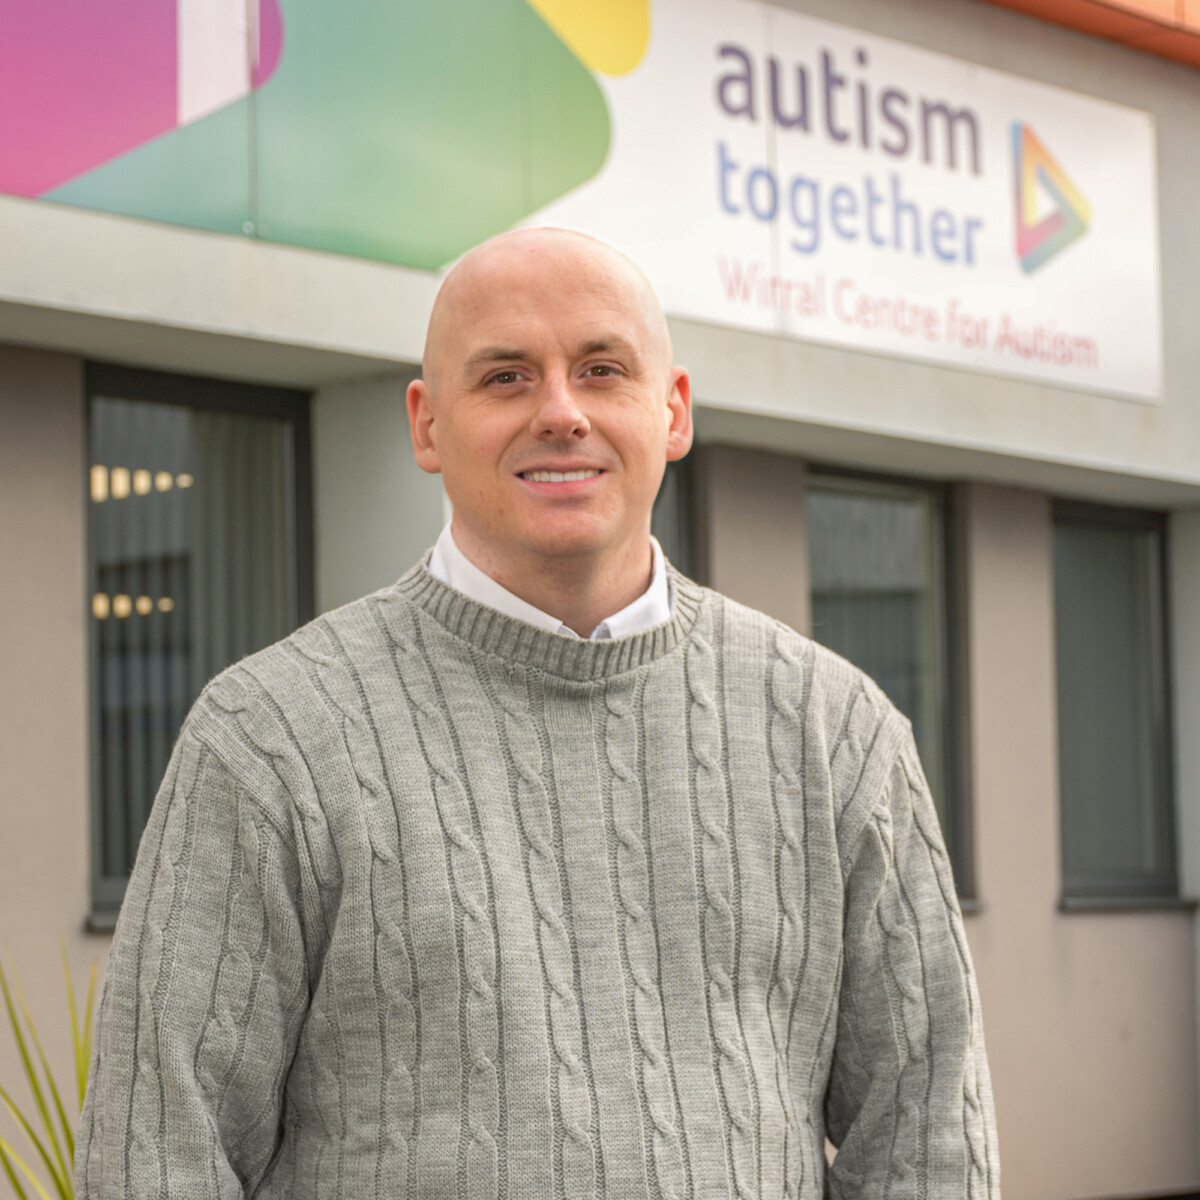 Richard Whitby, CEO , Autism Together